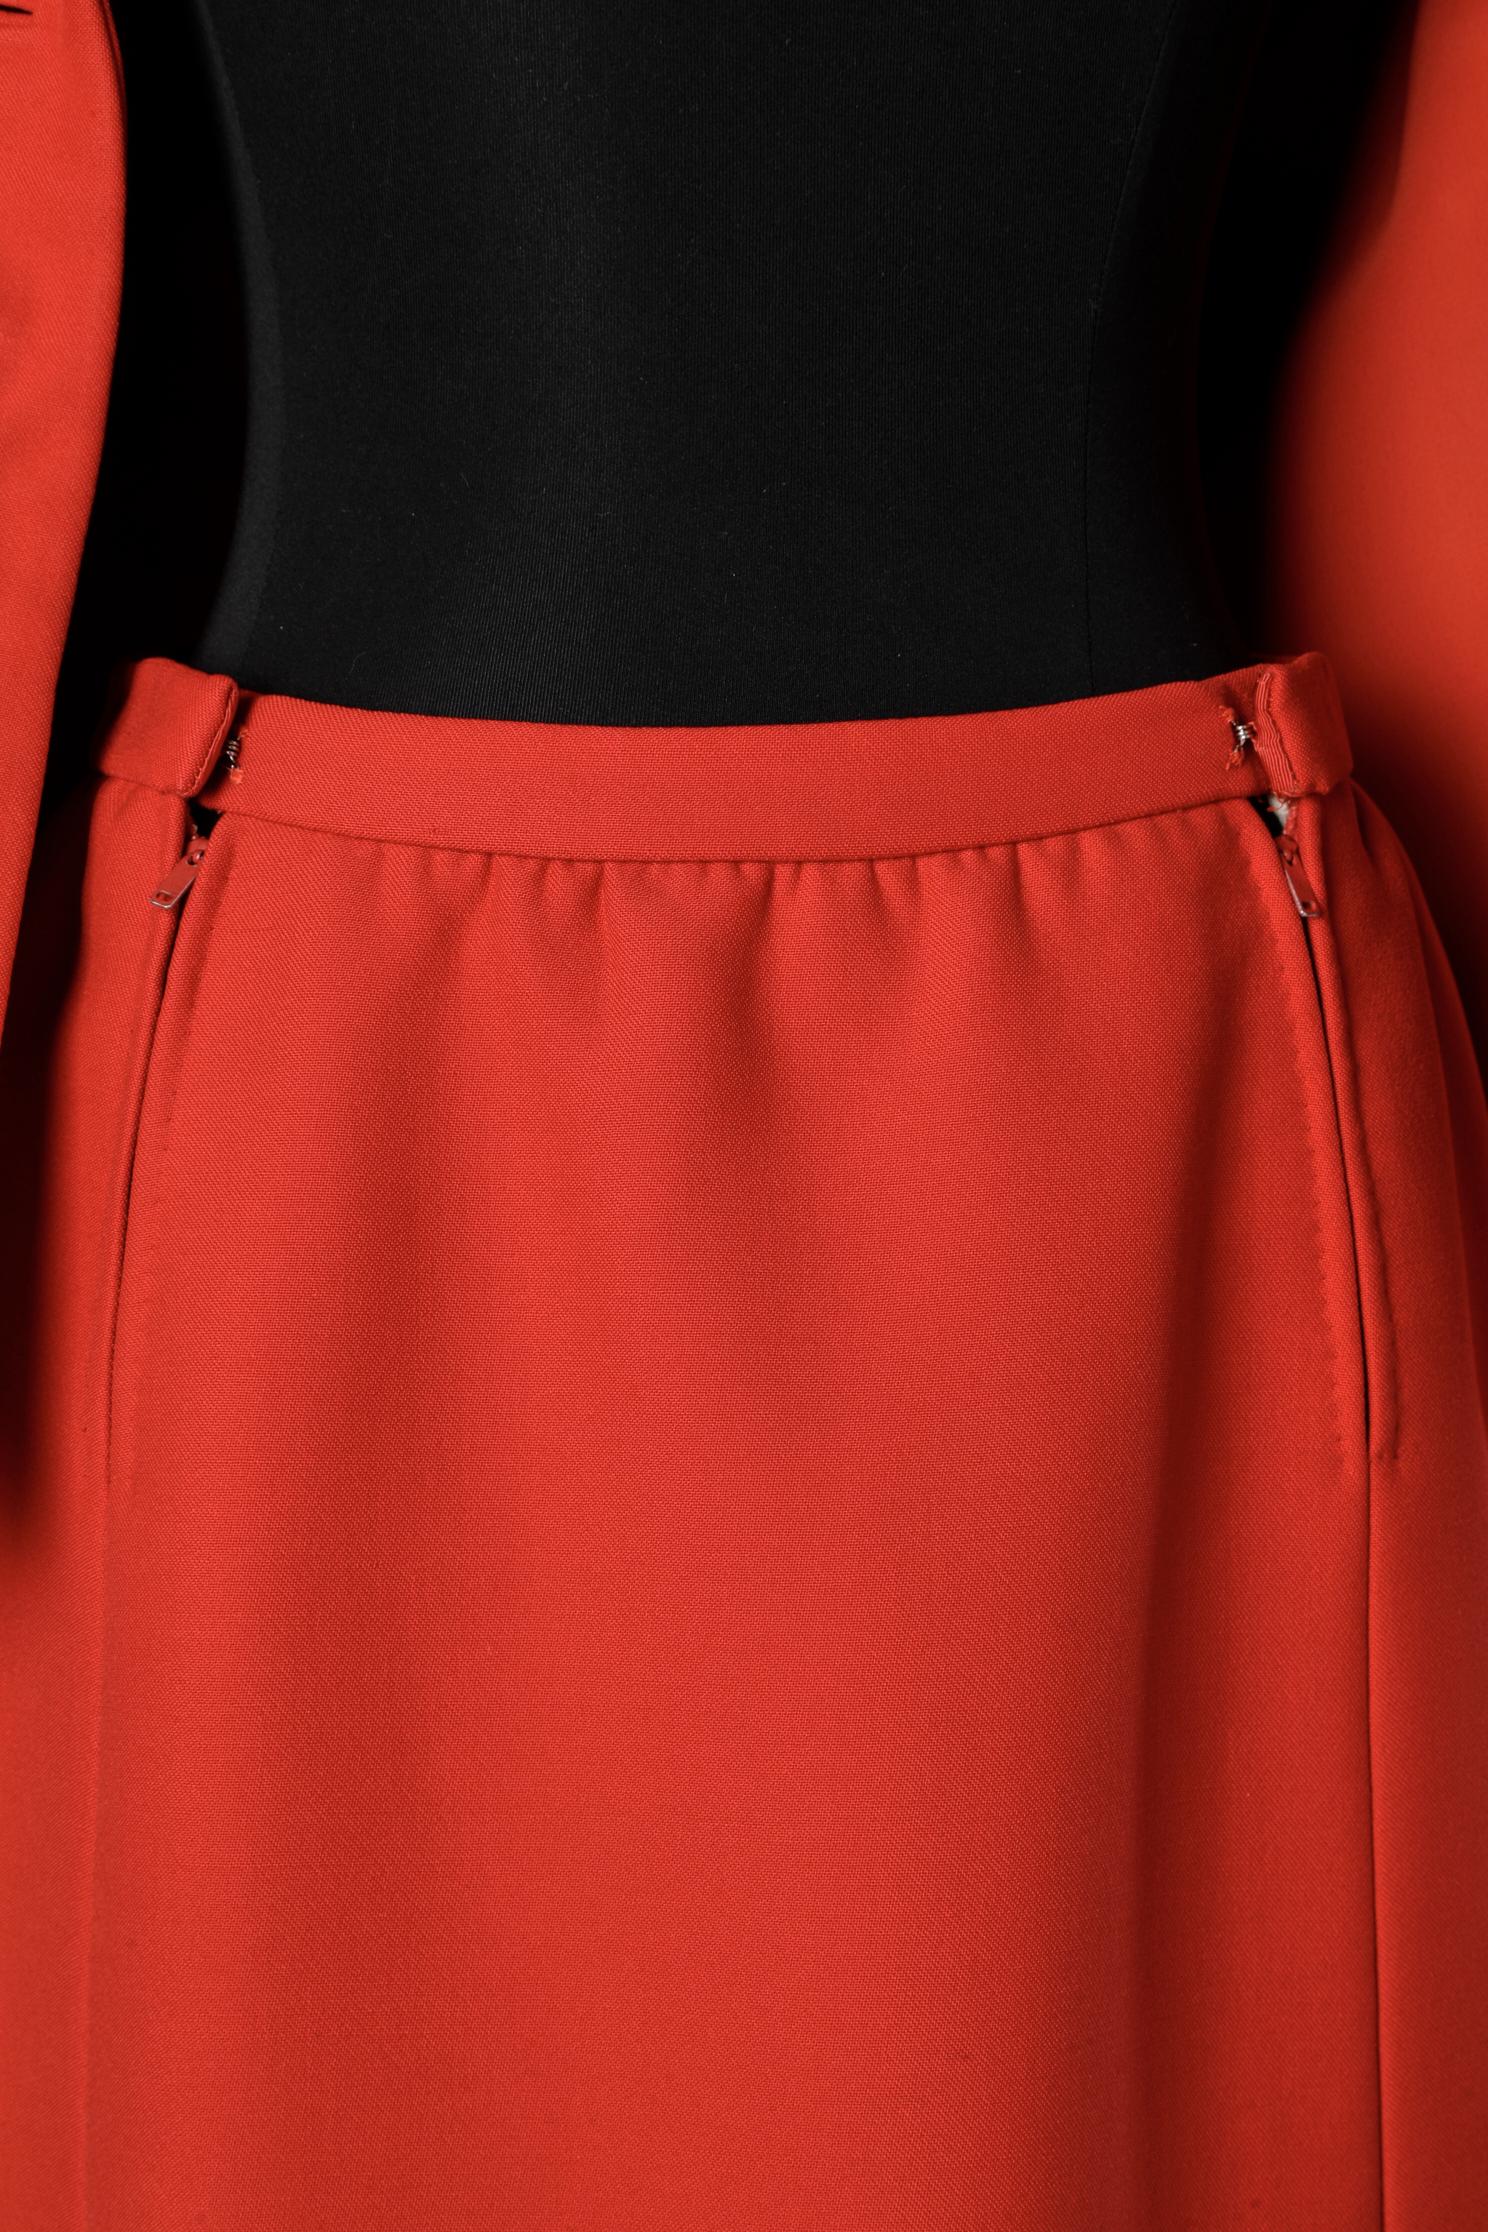 Red wool skirt-suit Christian Dior NY Inc for Bullock's Wilshire 3